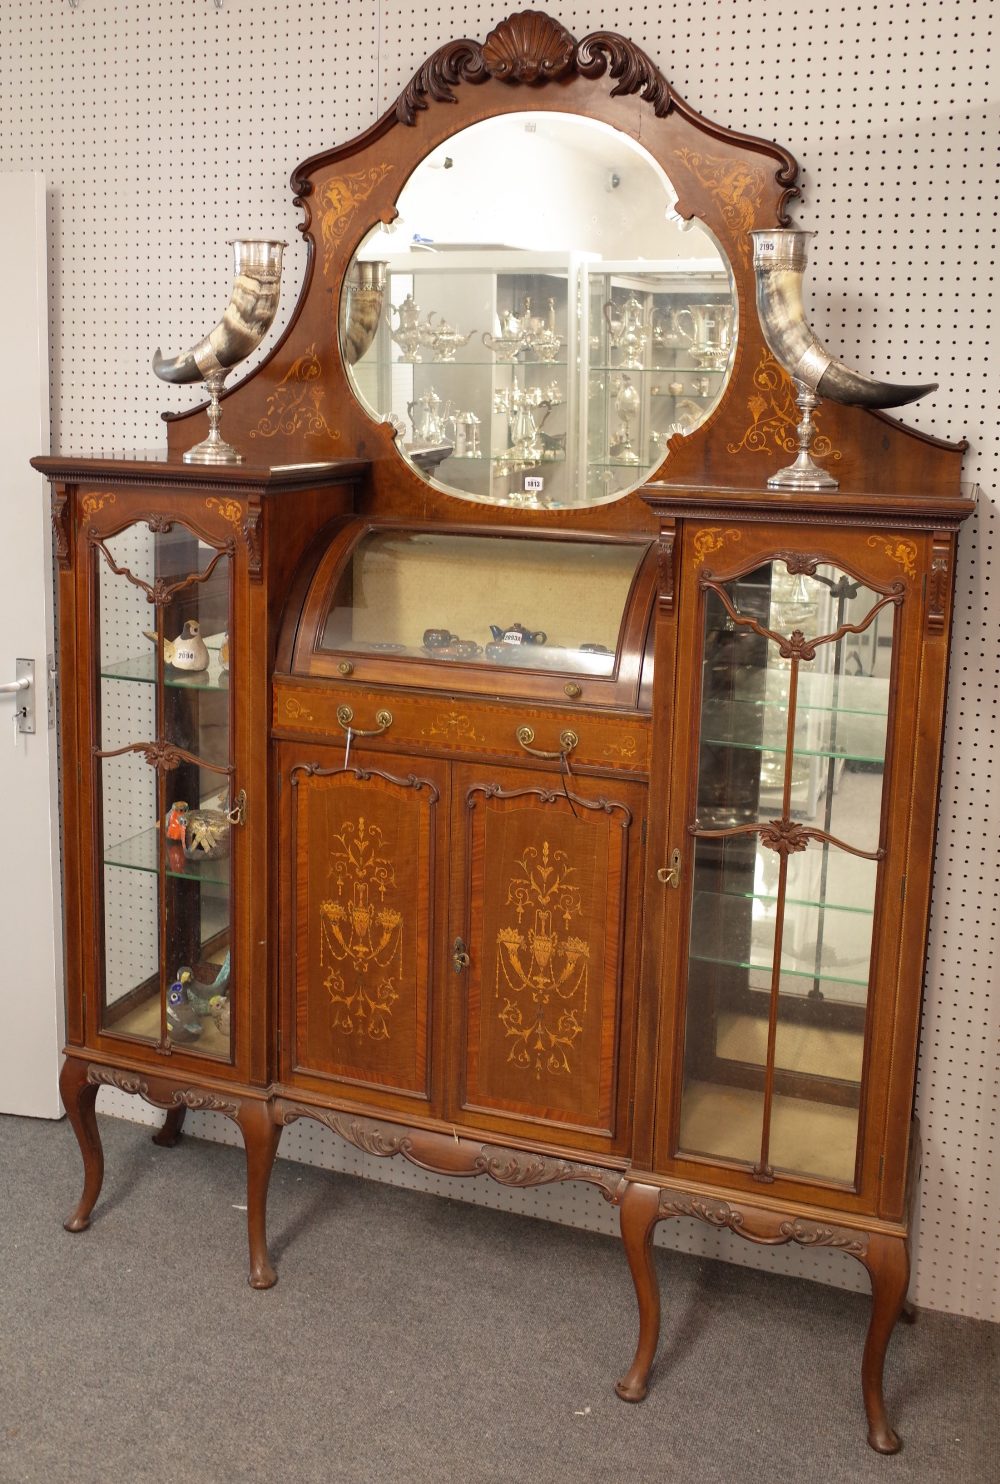 An Edwardian inlaid mahogany mirrored back display cabinet with bowed central compartment over